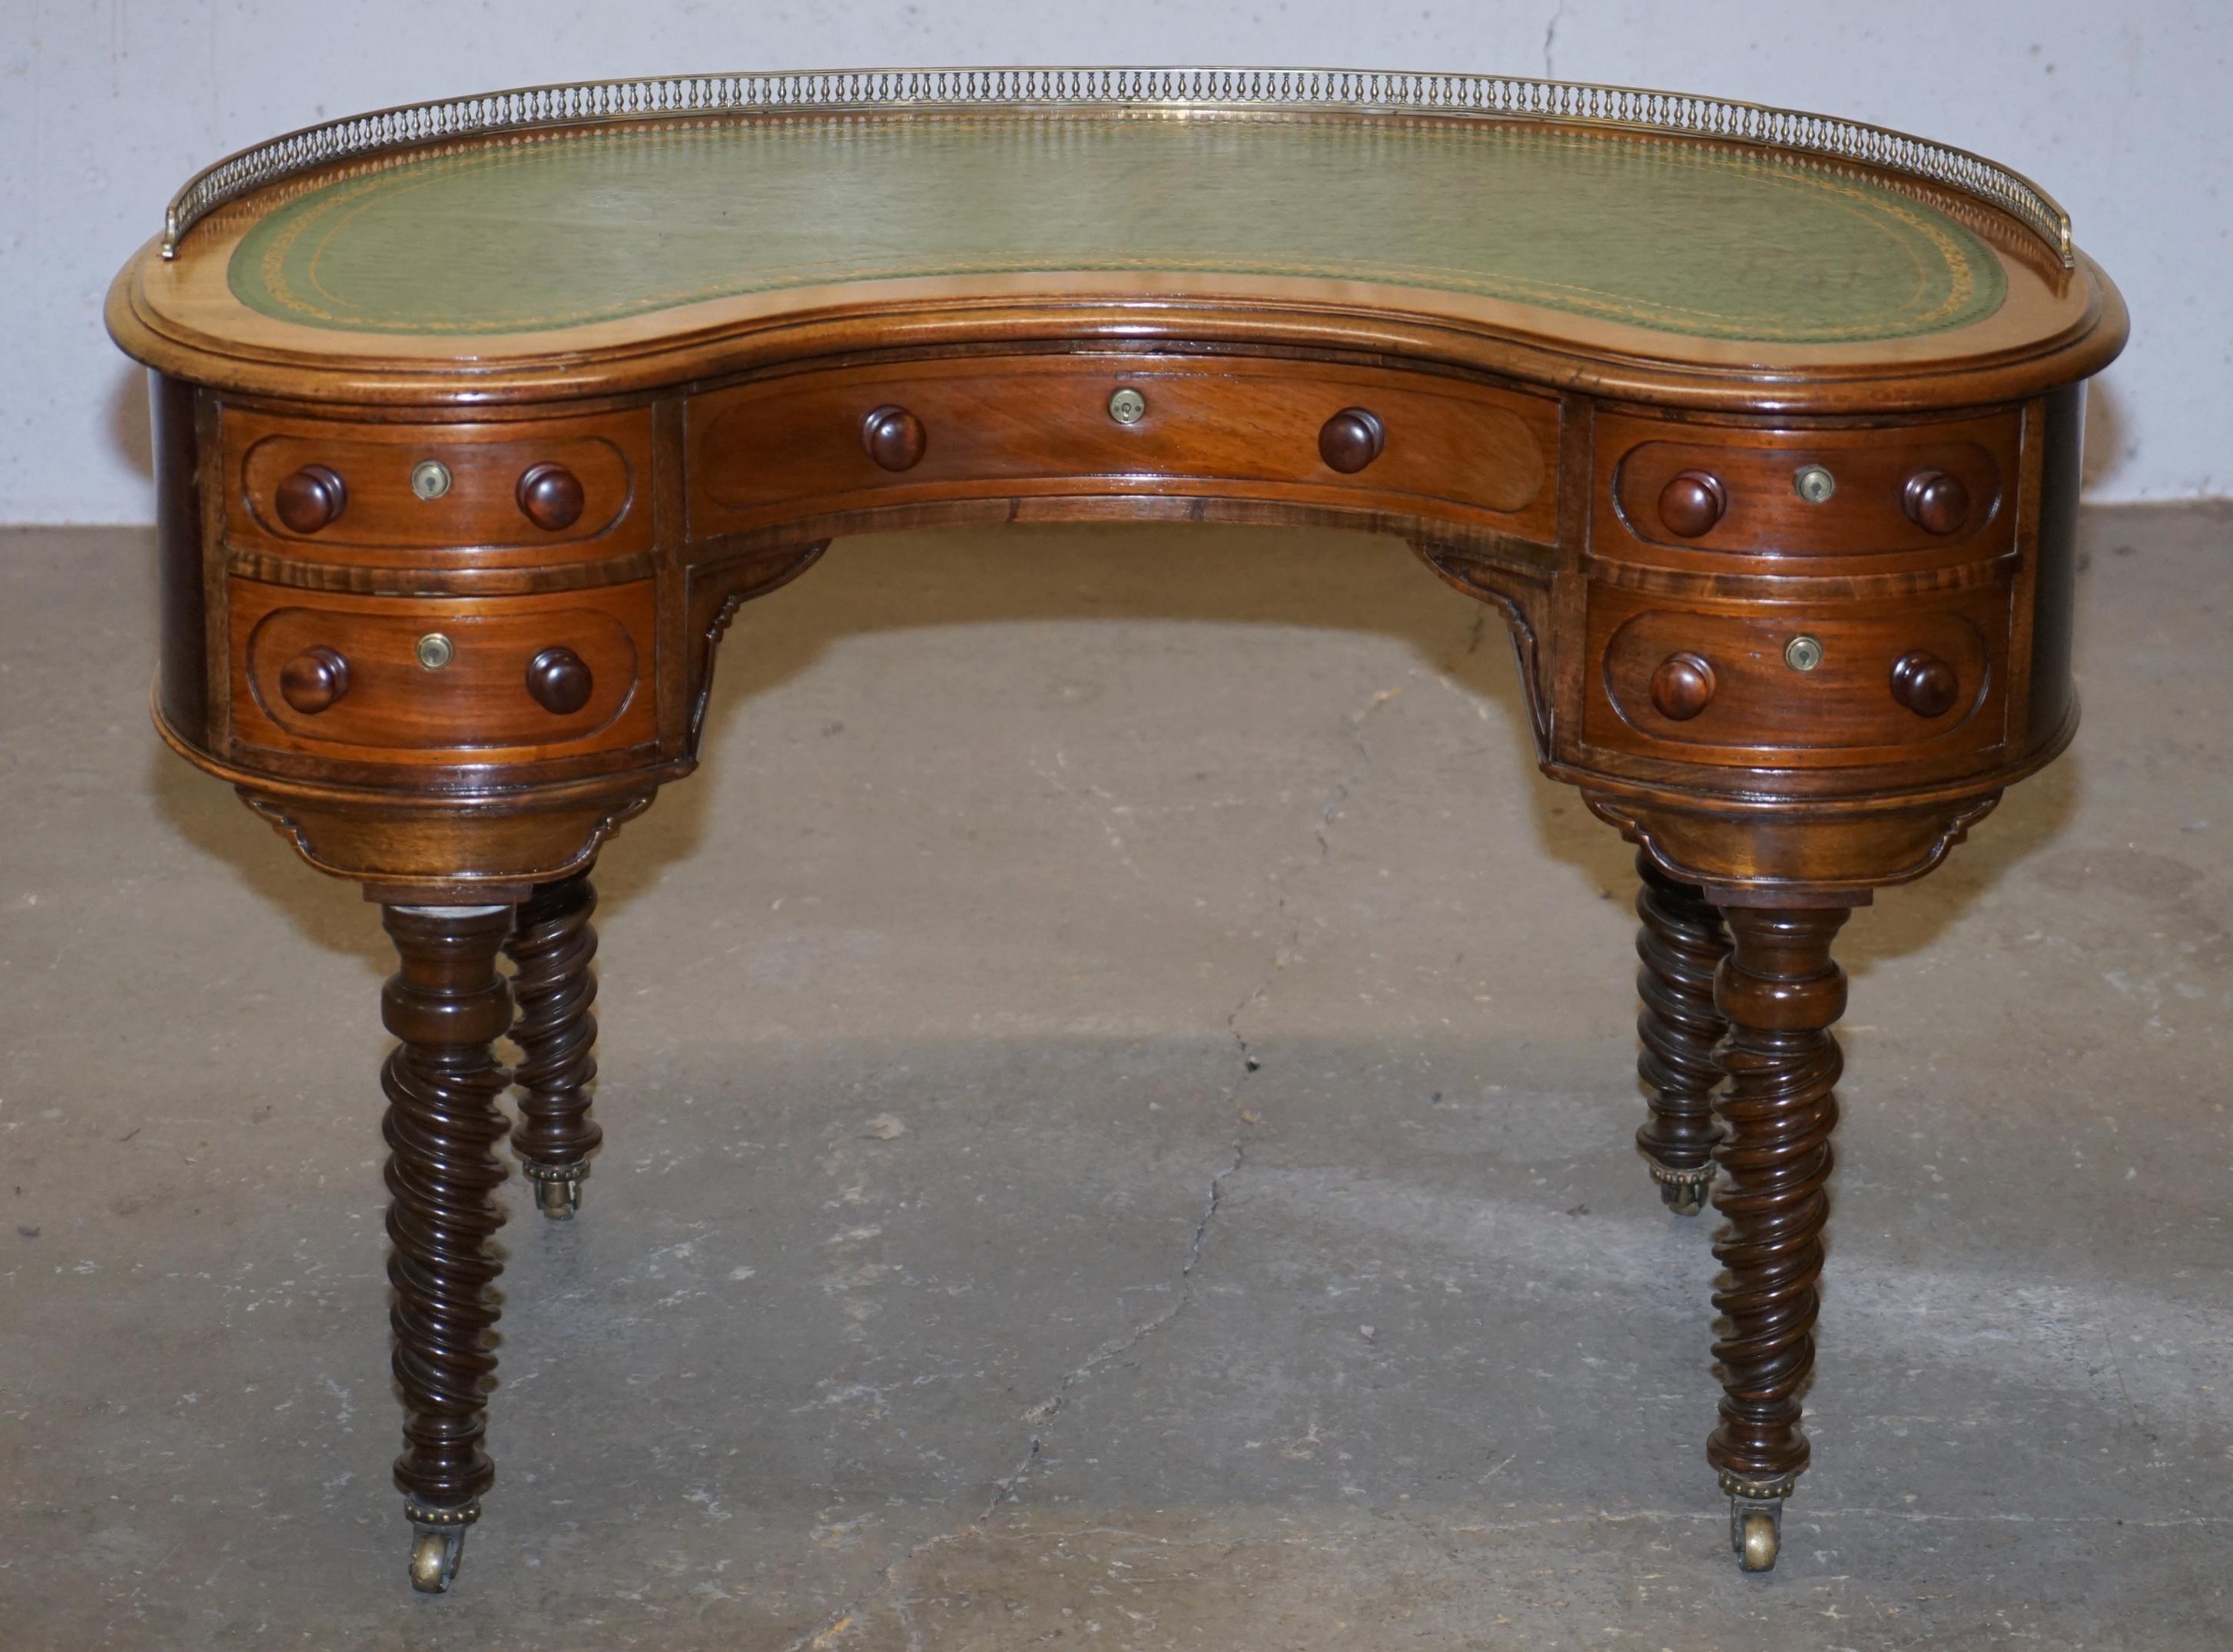 We are delighted to offer for sale this stunning and exceptionally rare Gillow's of Lancaster circa 1815 Military Campaign Kidney desk with brass gallery rail and removable barley twist legs 

An exceptionally rare example of a High Victorian